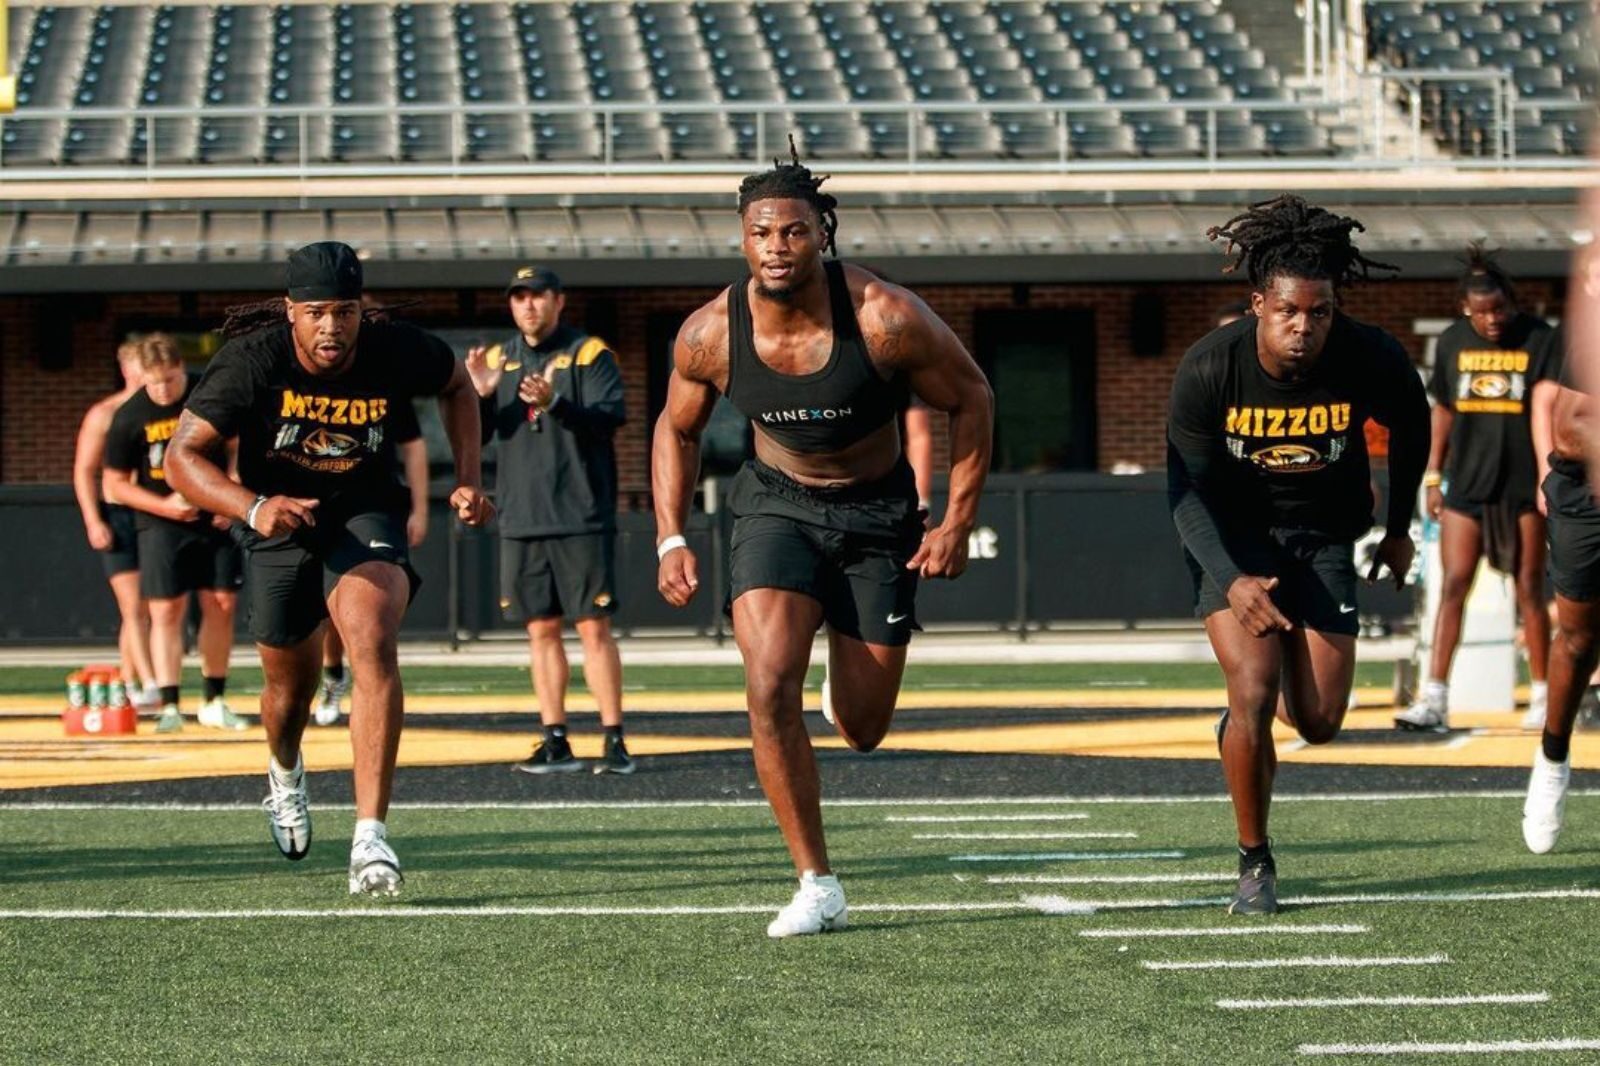 American football players are now being equipped with player trackers that provide coaches with vital information that helps prevent injuries during football workouts.